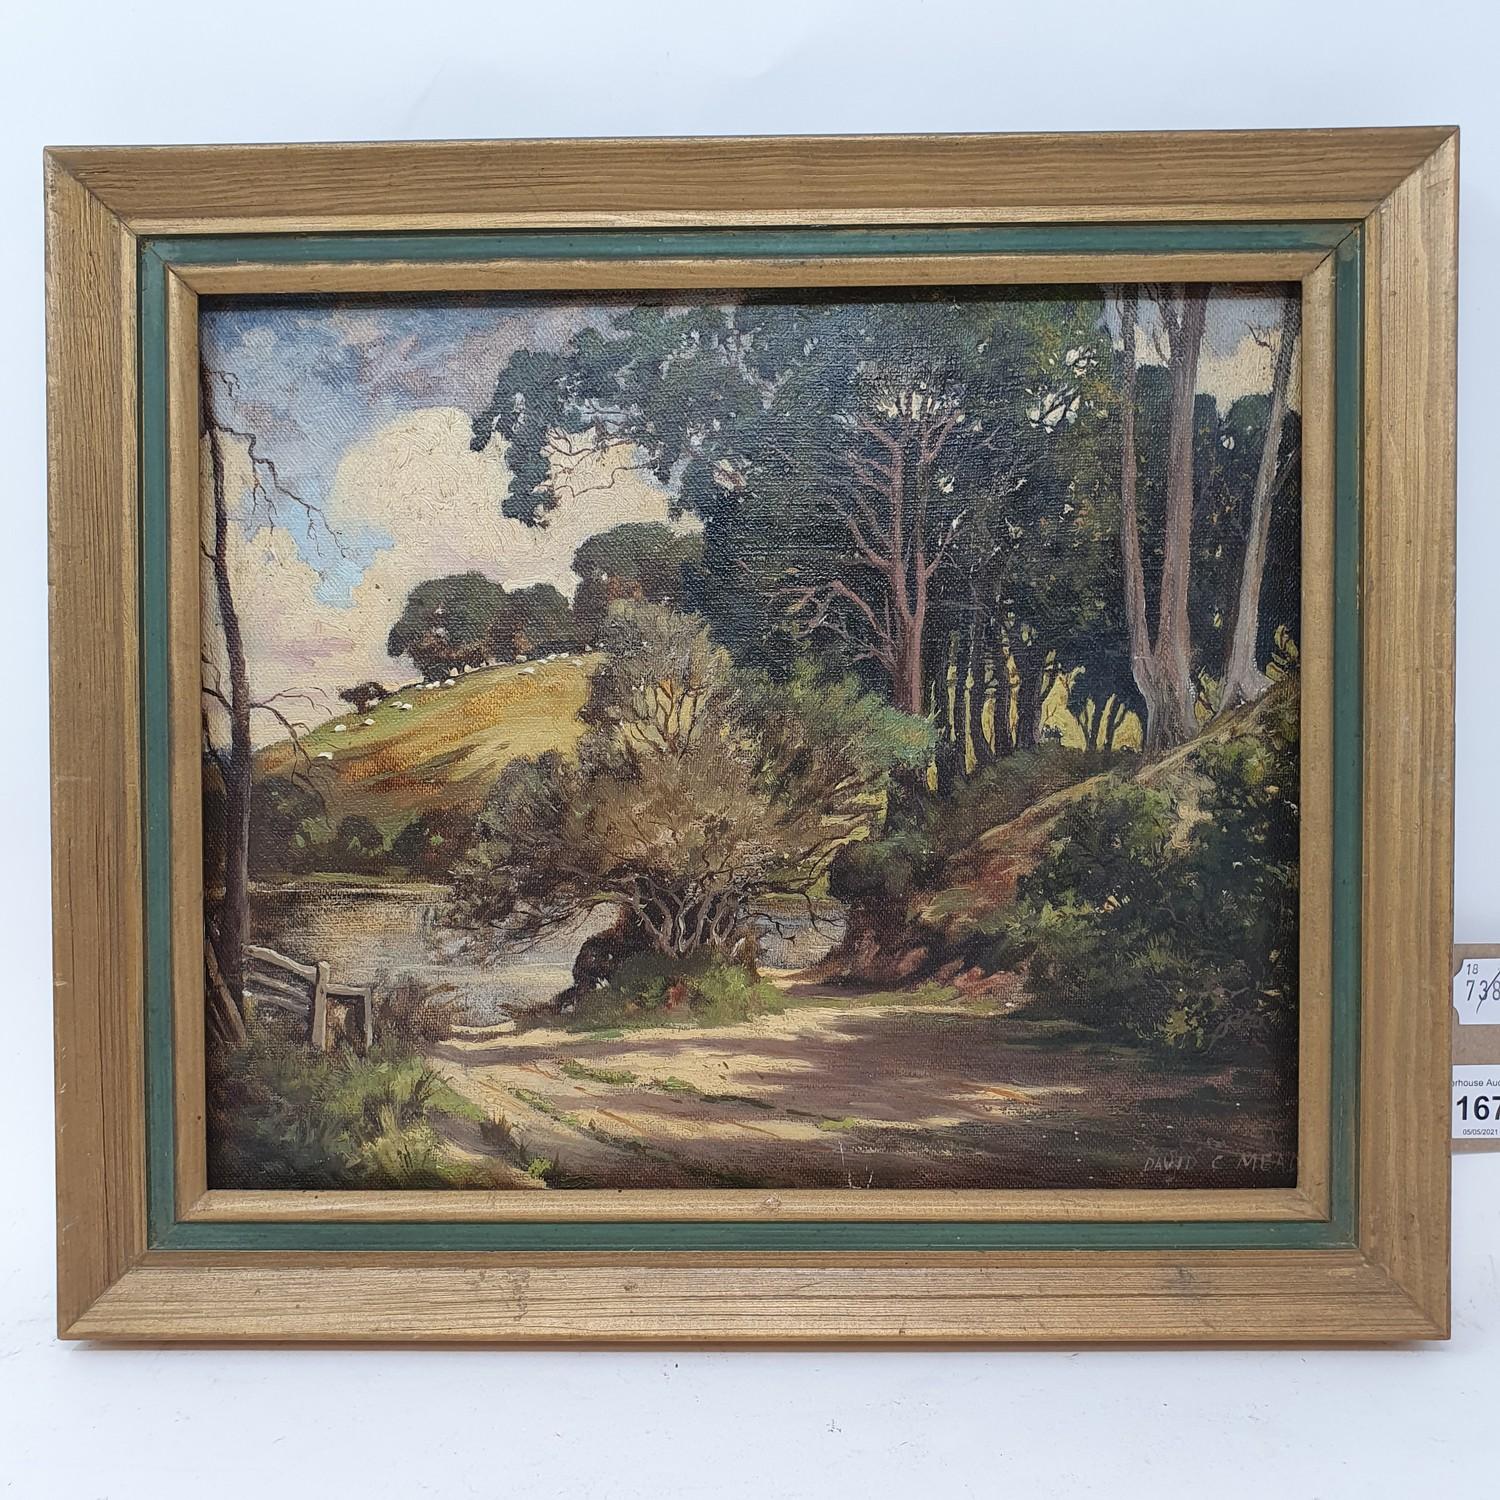 David Mead (British 1906-1986), a landscape, oil on canvas, signed, 24 x 29 cm, an English school, - Image 2 of 4